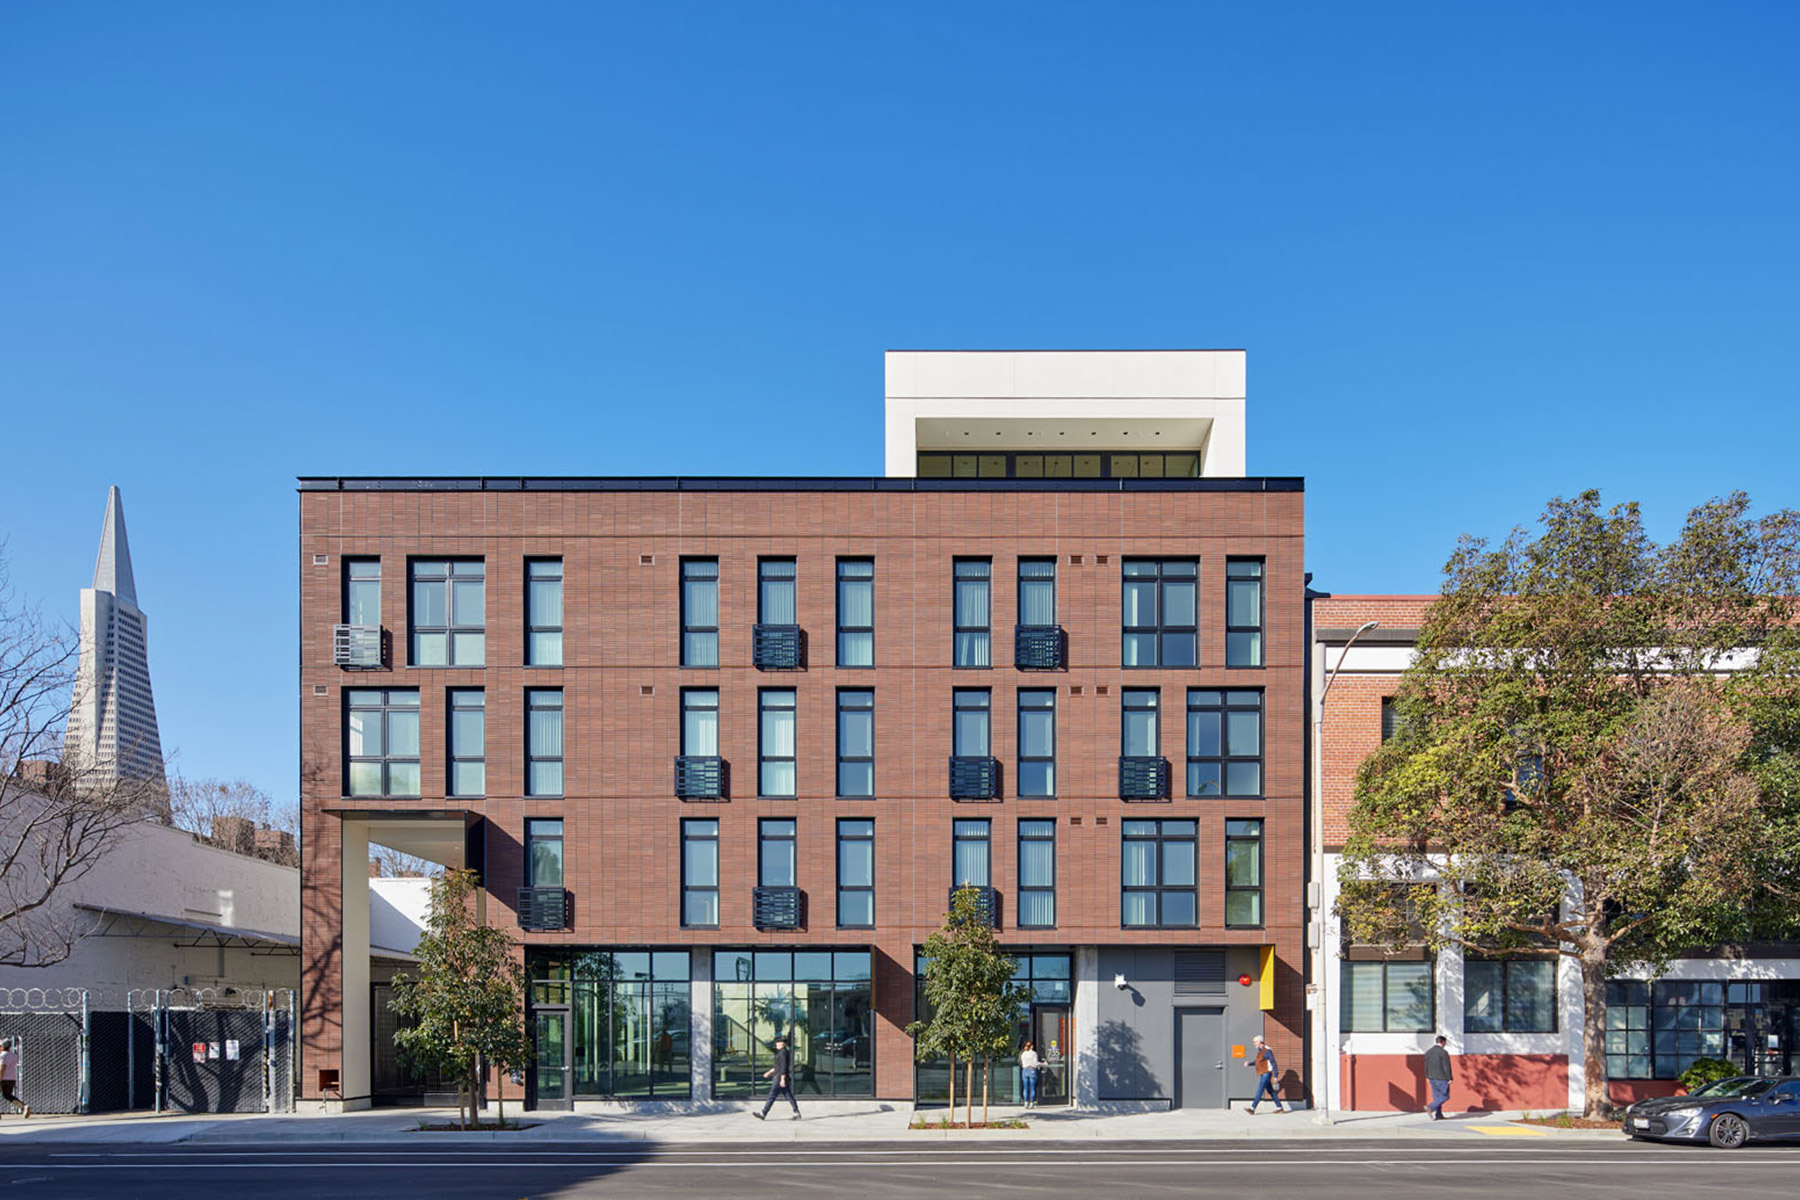 735 Davis provides affordable homes from formerly homeless to middle income seniors on the site of the former Embarcadero Freeway.